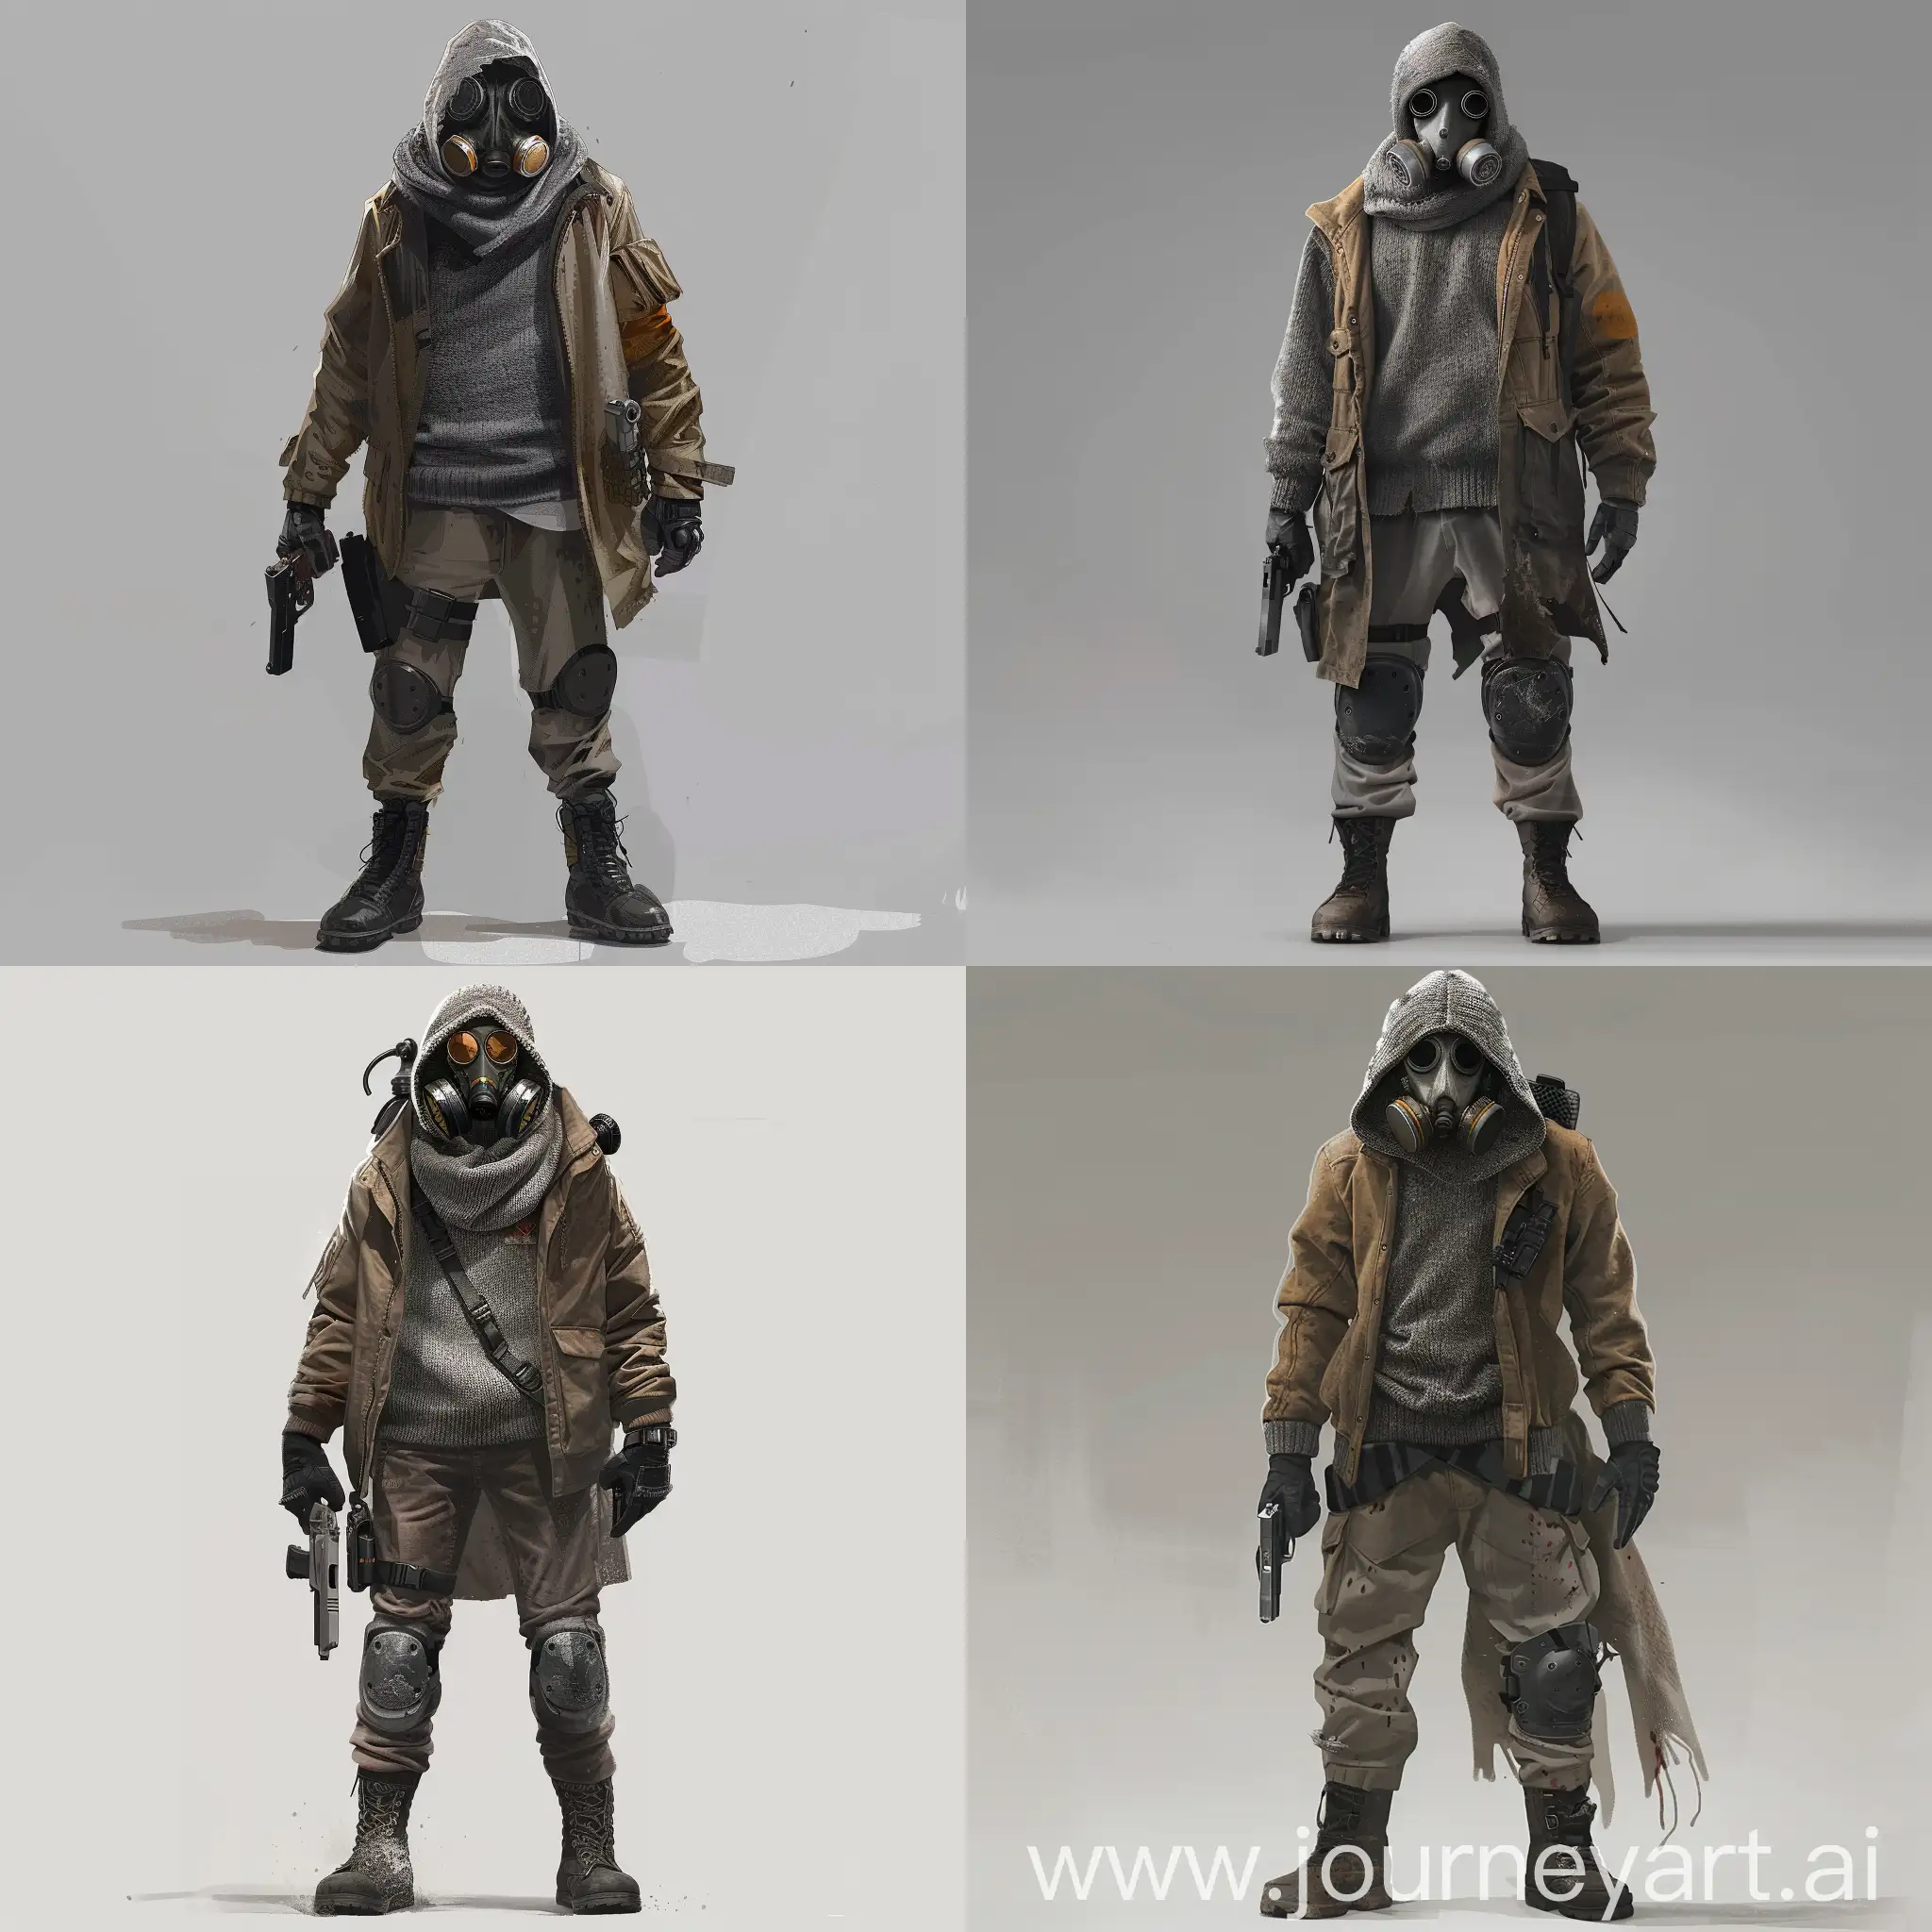 Stalker-in-Gray-Sweater-with-Gas-Mask-and-Pistol